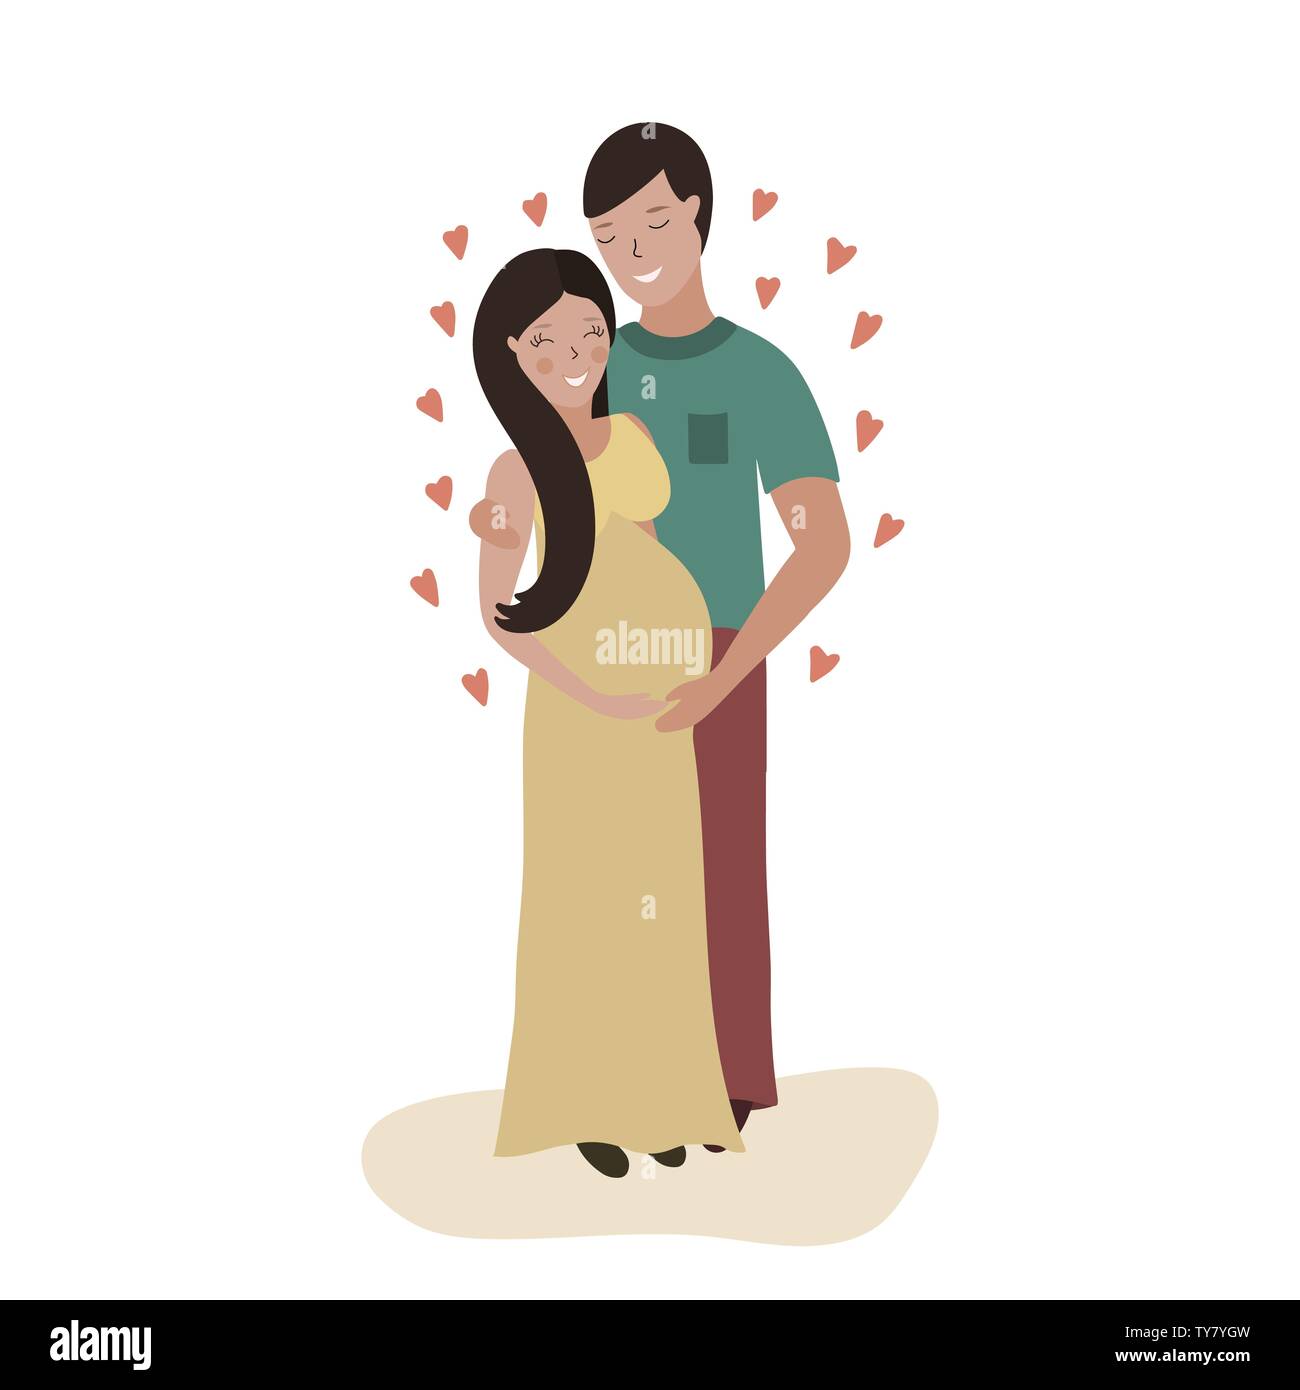 Pregnant wife and her husband. Happy married couple. Flat illustration. Stock Vector